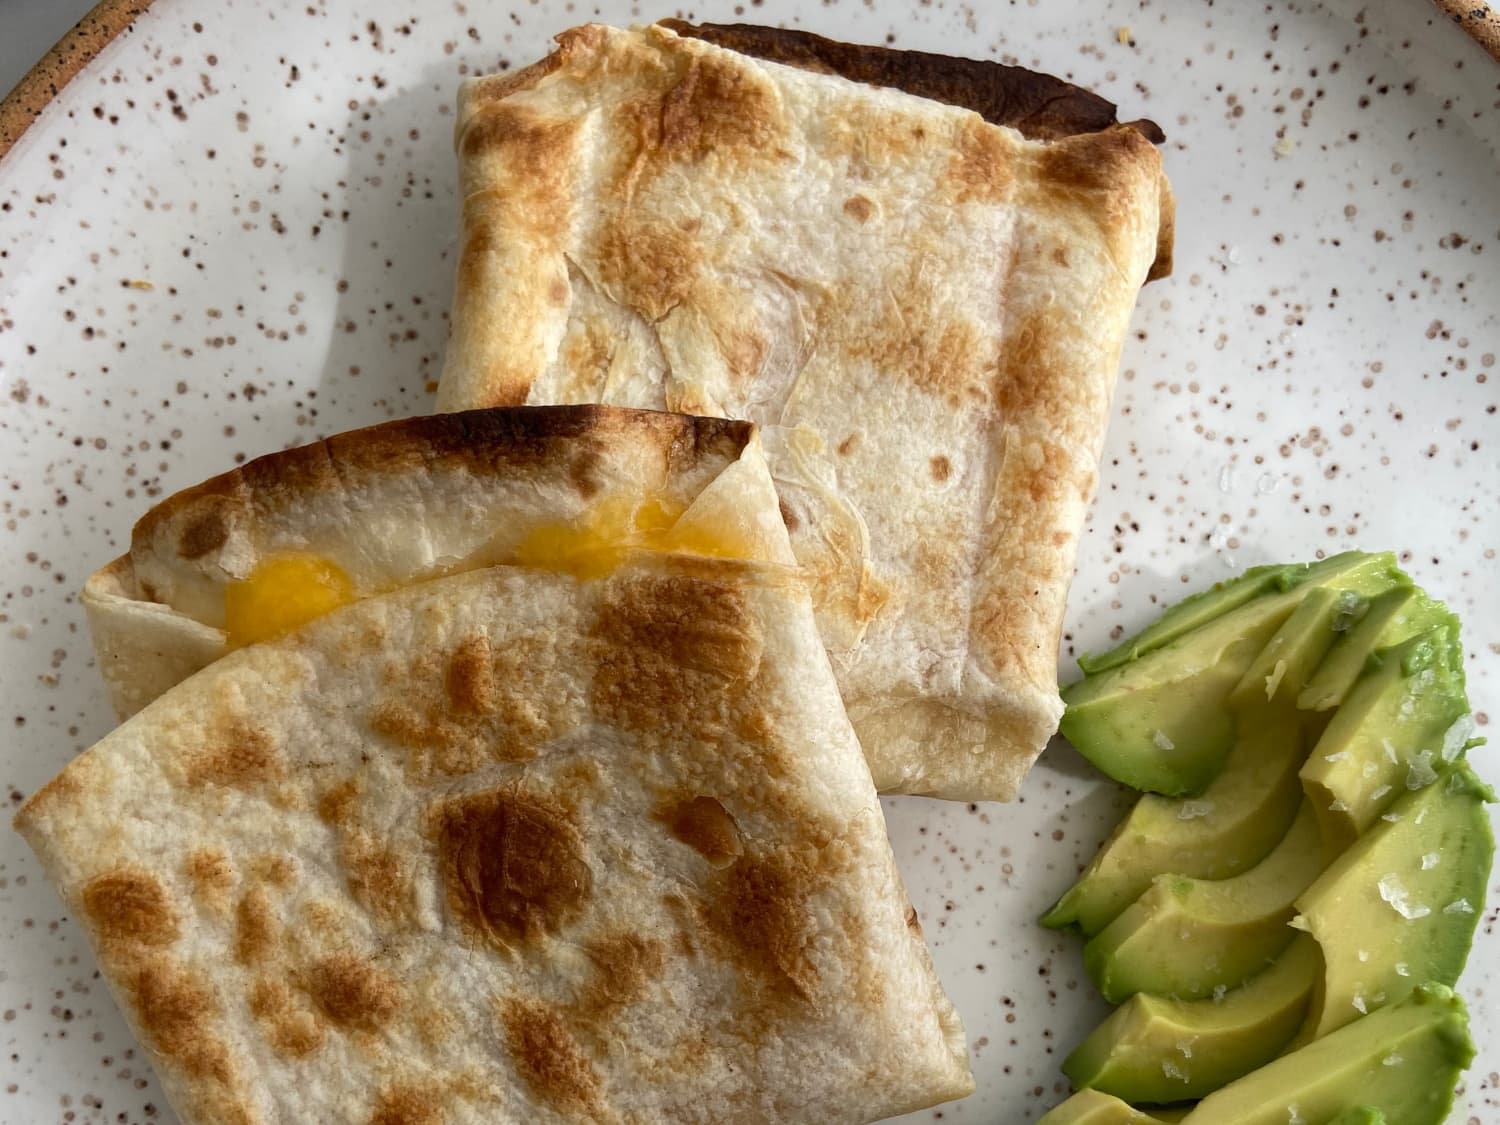 This Flour Tortilla Toaster Hack Will Change Your Taco Tuesday Forever